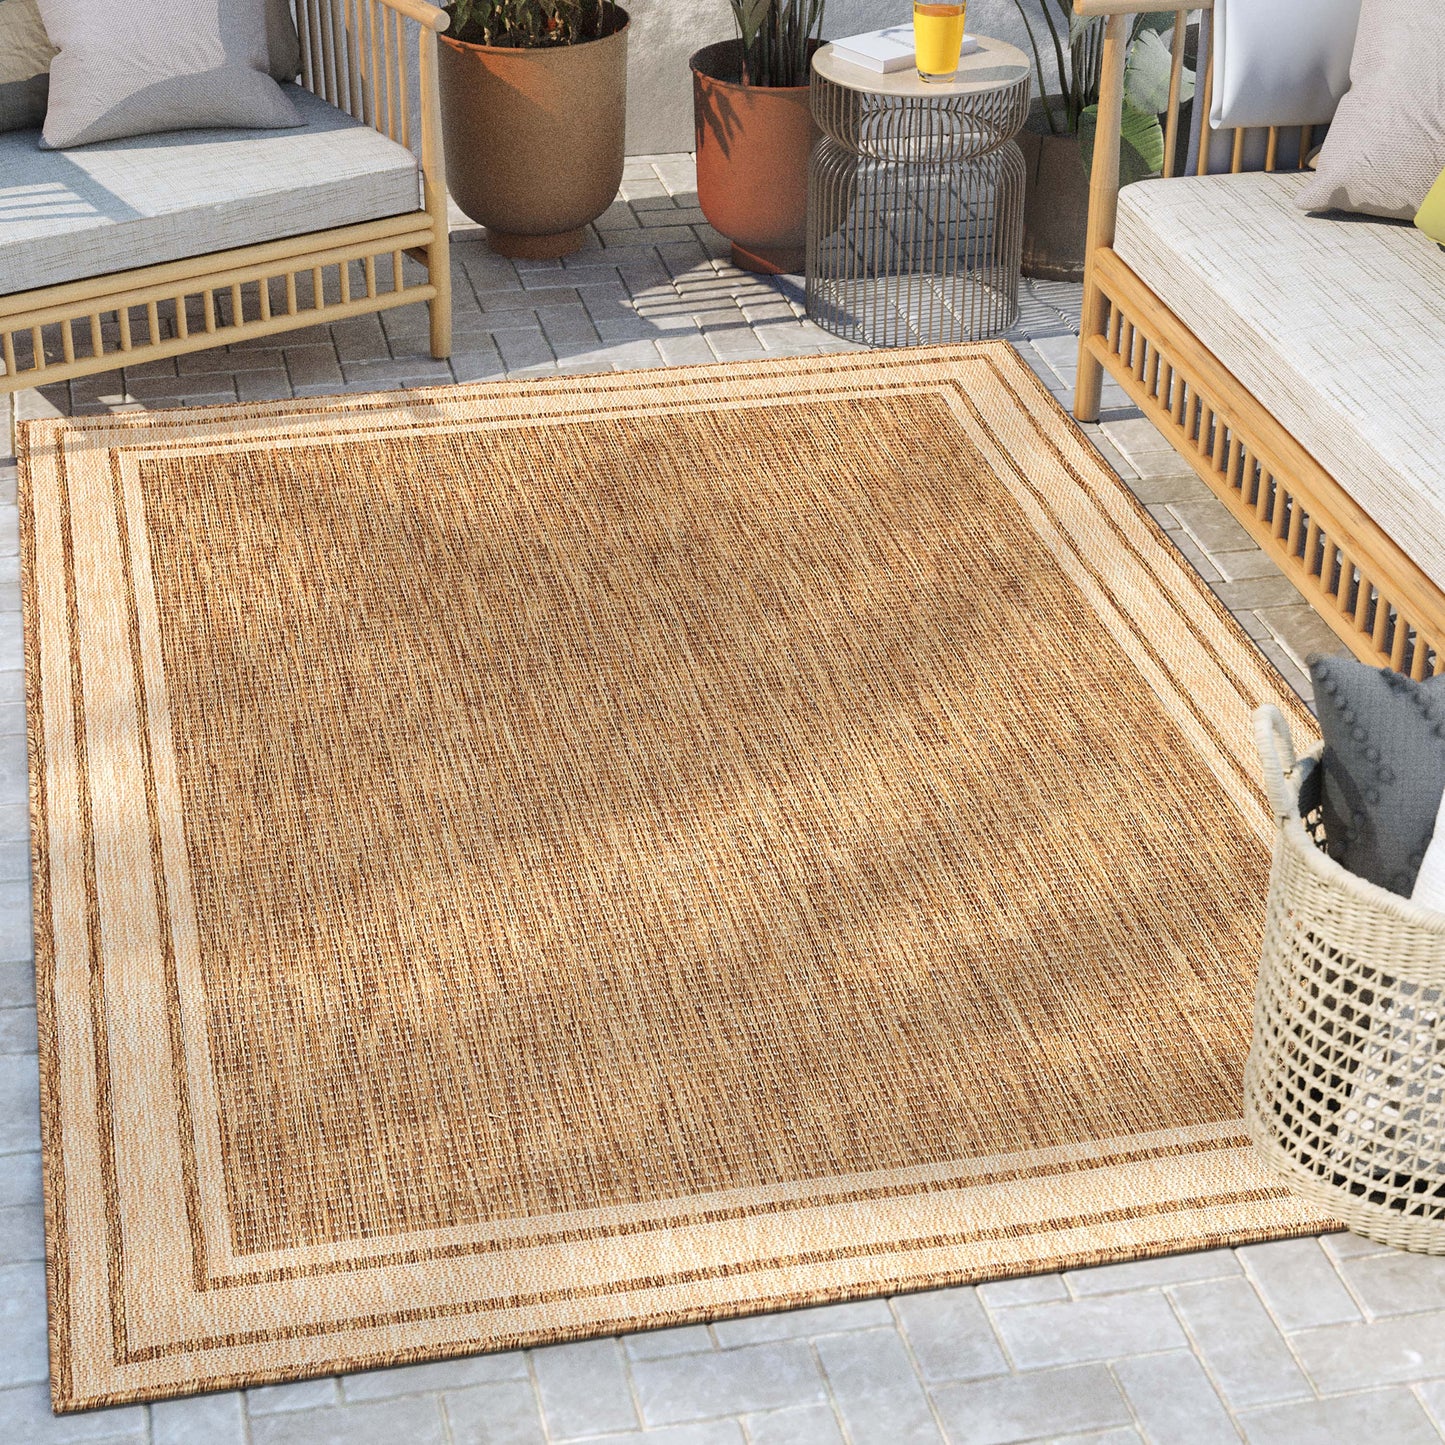 Perry Solid Border Pattern Indoor/Outdoor Brown Textured Rug FAL-38